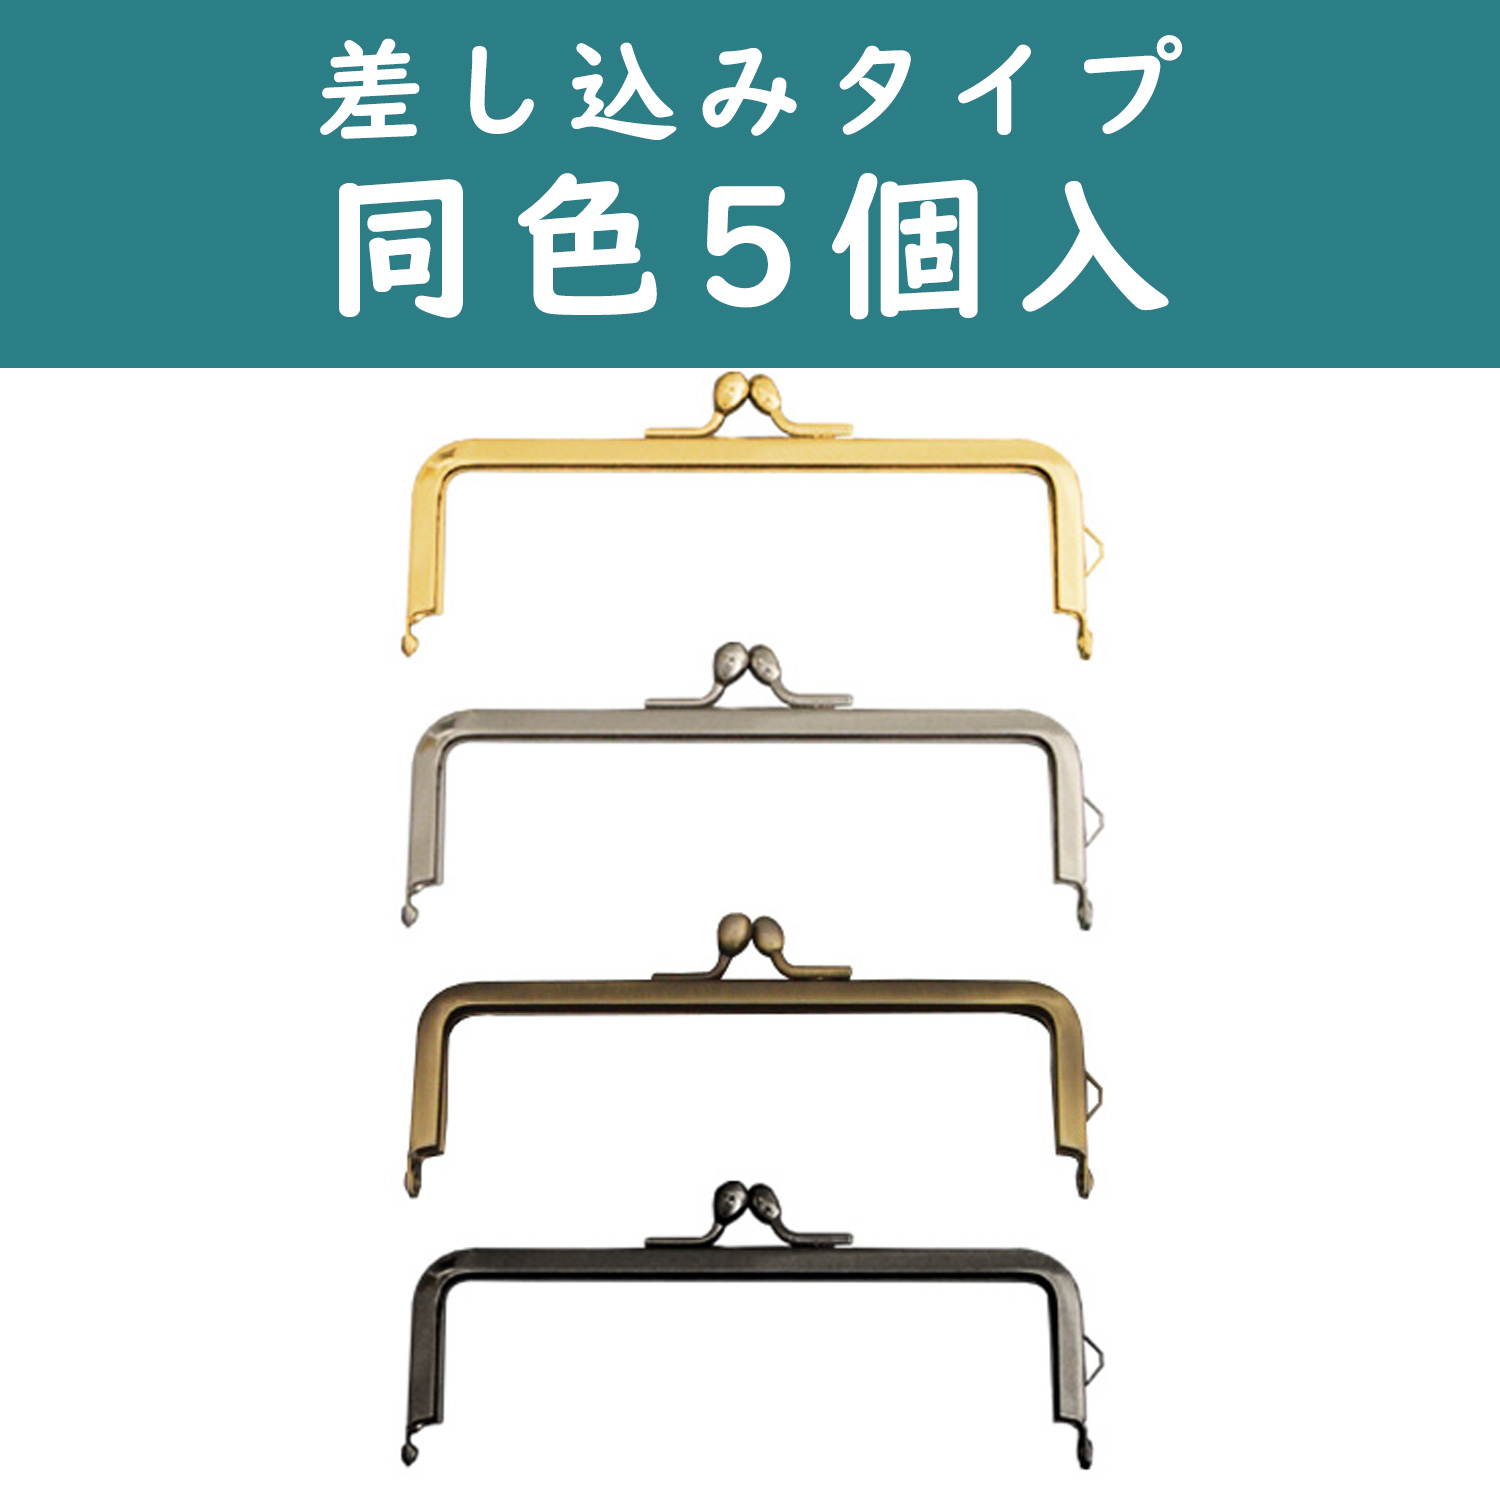 SK14 No-sew Purse Frame, outer size approx. W11.5 x H5cm, 5pcs (bag)